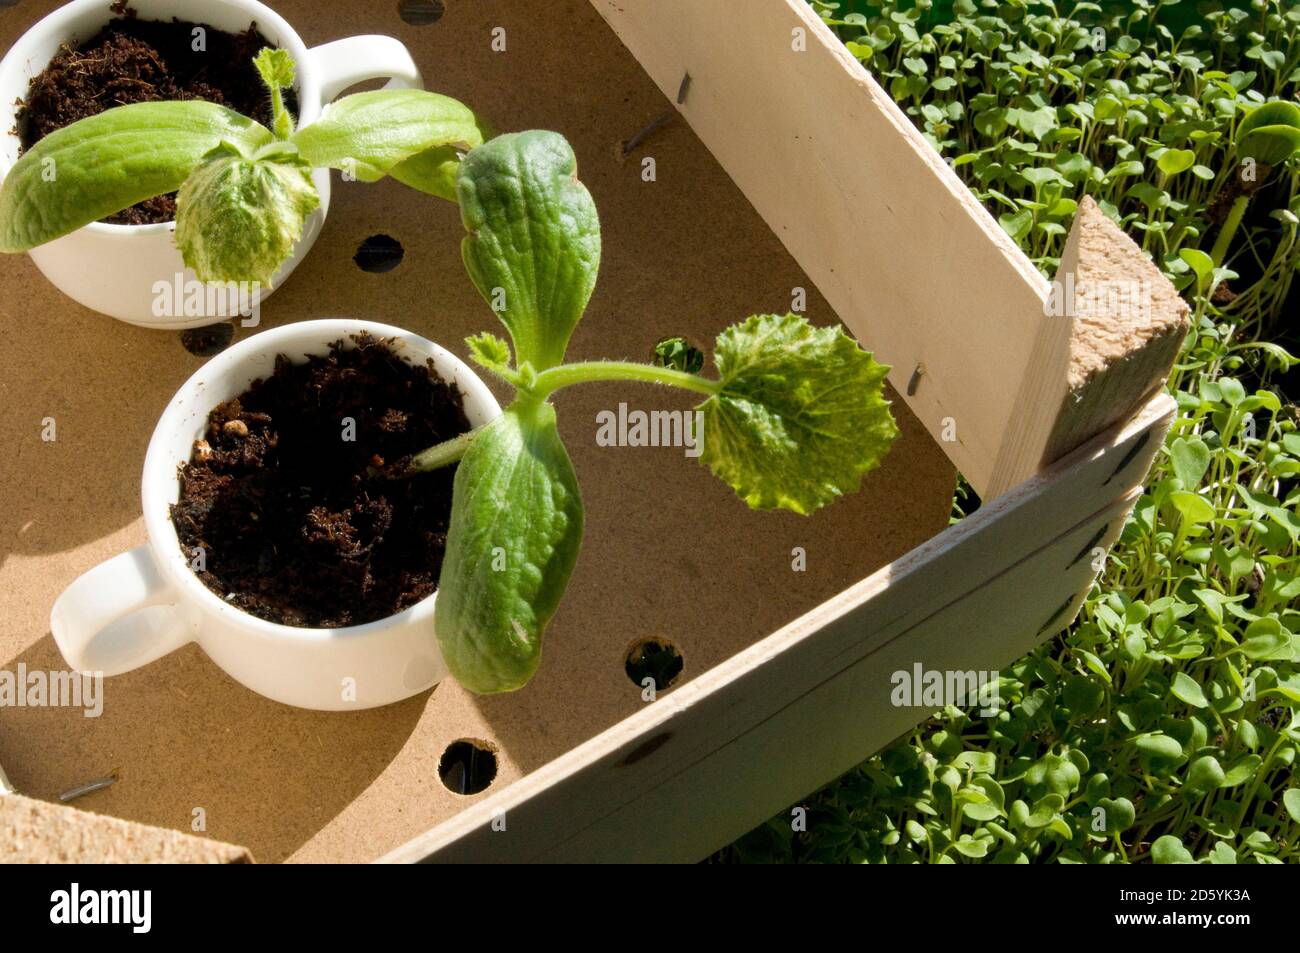 Old cups used as nursery pots for courgette plants Stock Photo